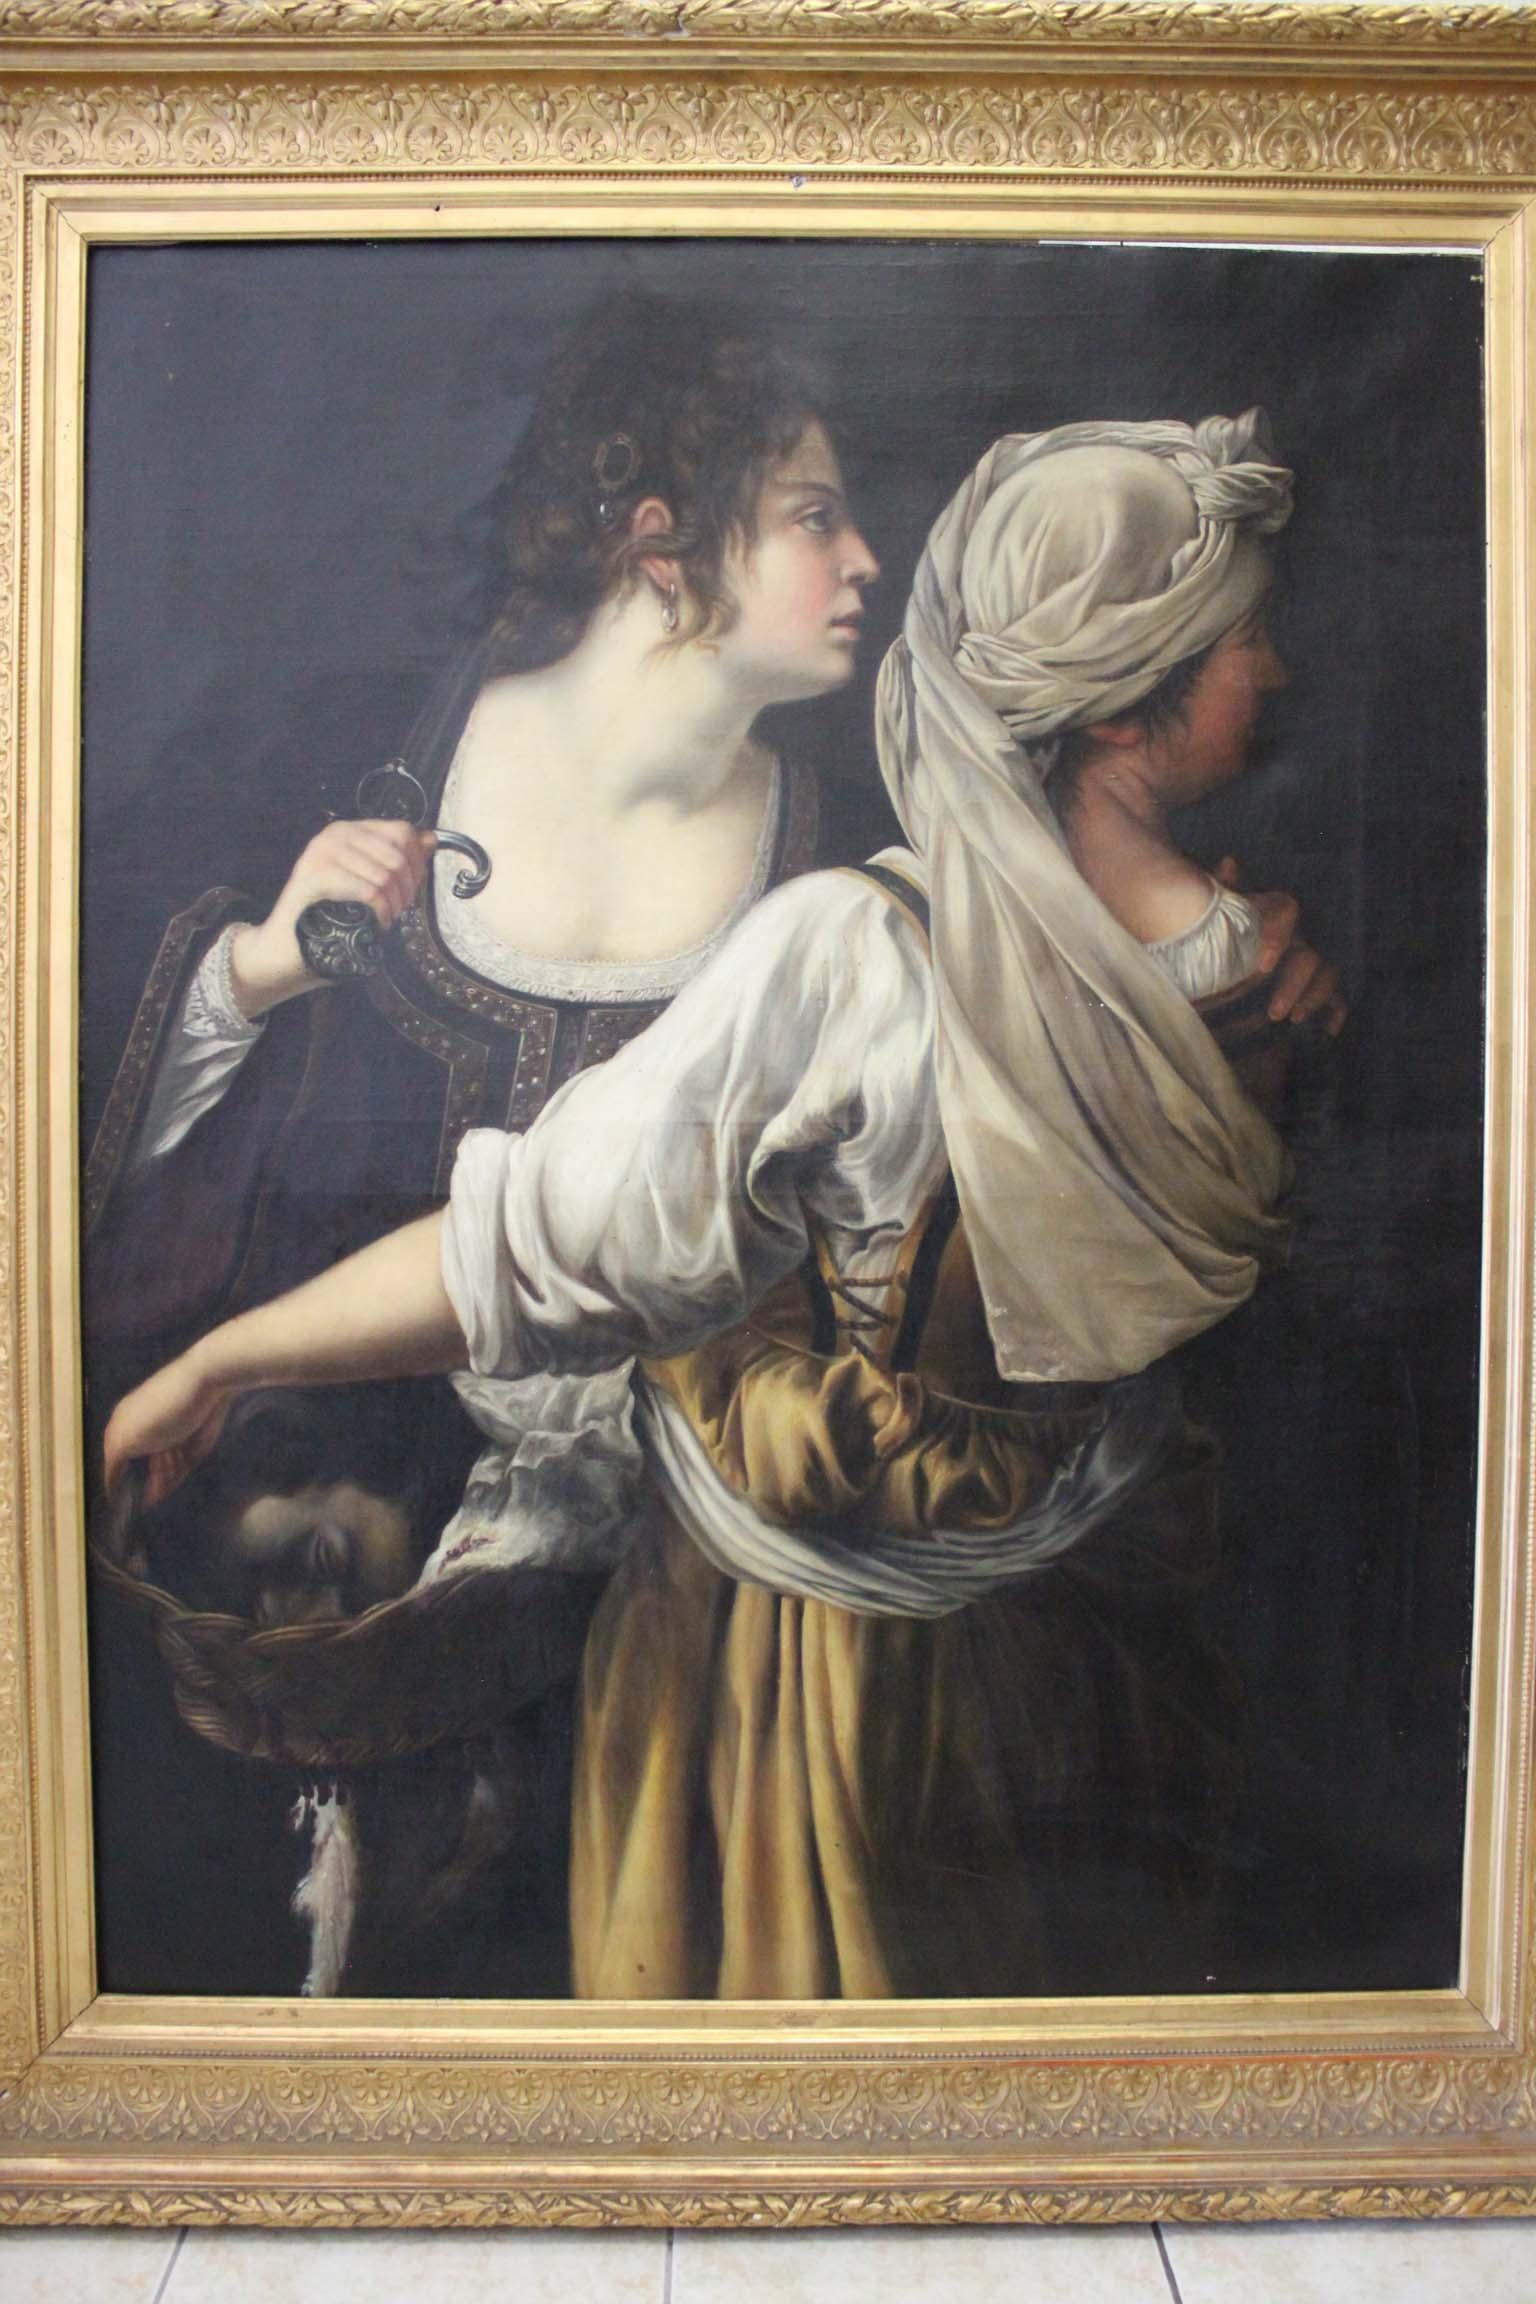 Oil on canvas representing Judith and her servant, carrying the head of Holopherne, inspired by the painting of Artemisia Gentileschi at the Palais Pitti of Florence.
Very large painting, framed.
Dimensions: H 116cm, W 96cm.
With frame: H140, W